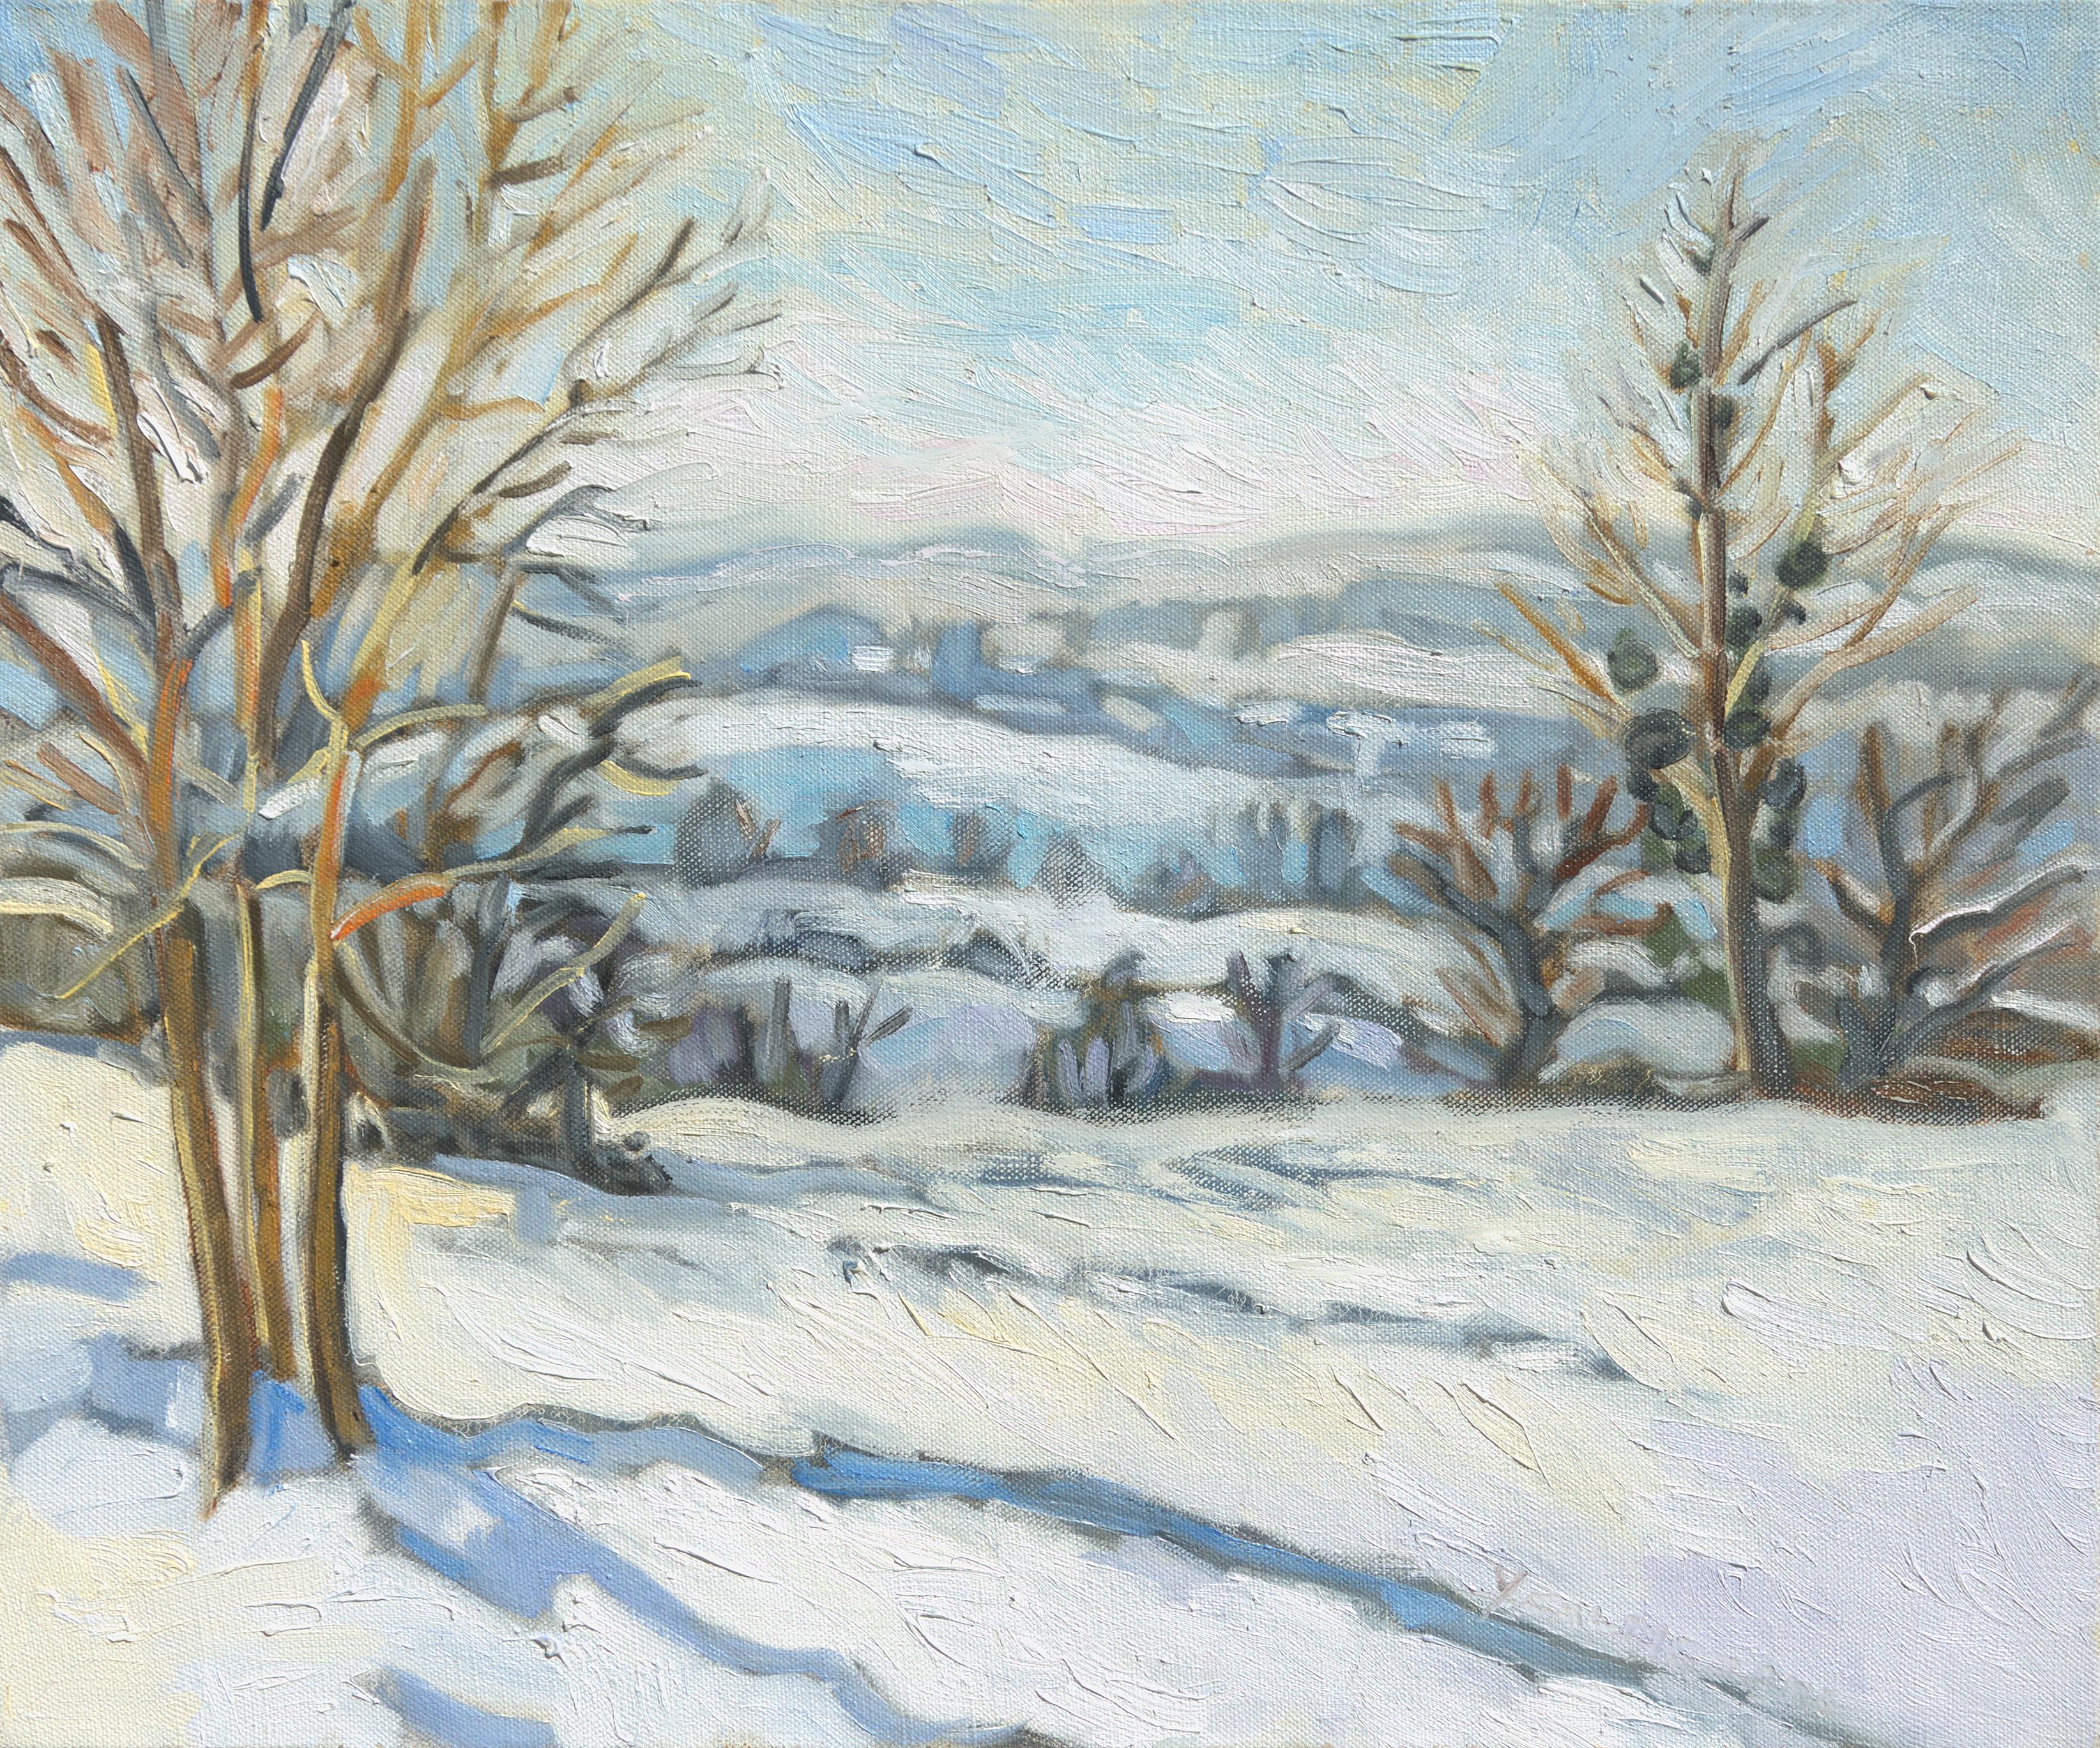 "The White Theater", Winter Rural Landscape Impressionist Oil Painting